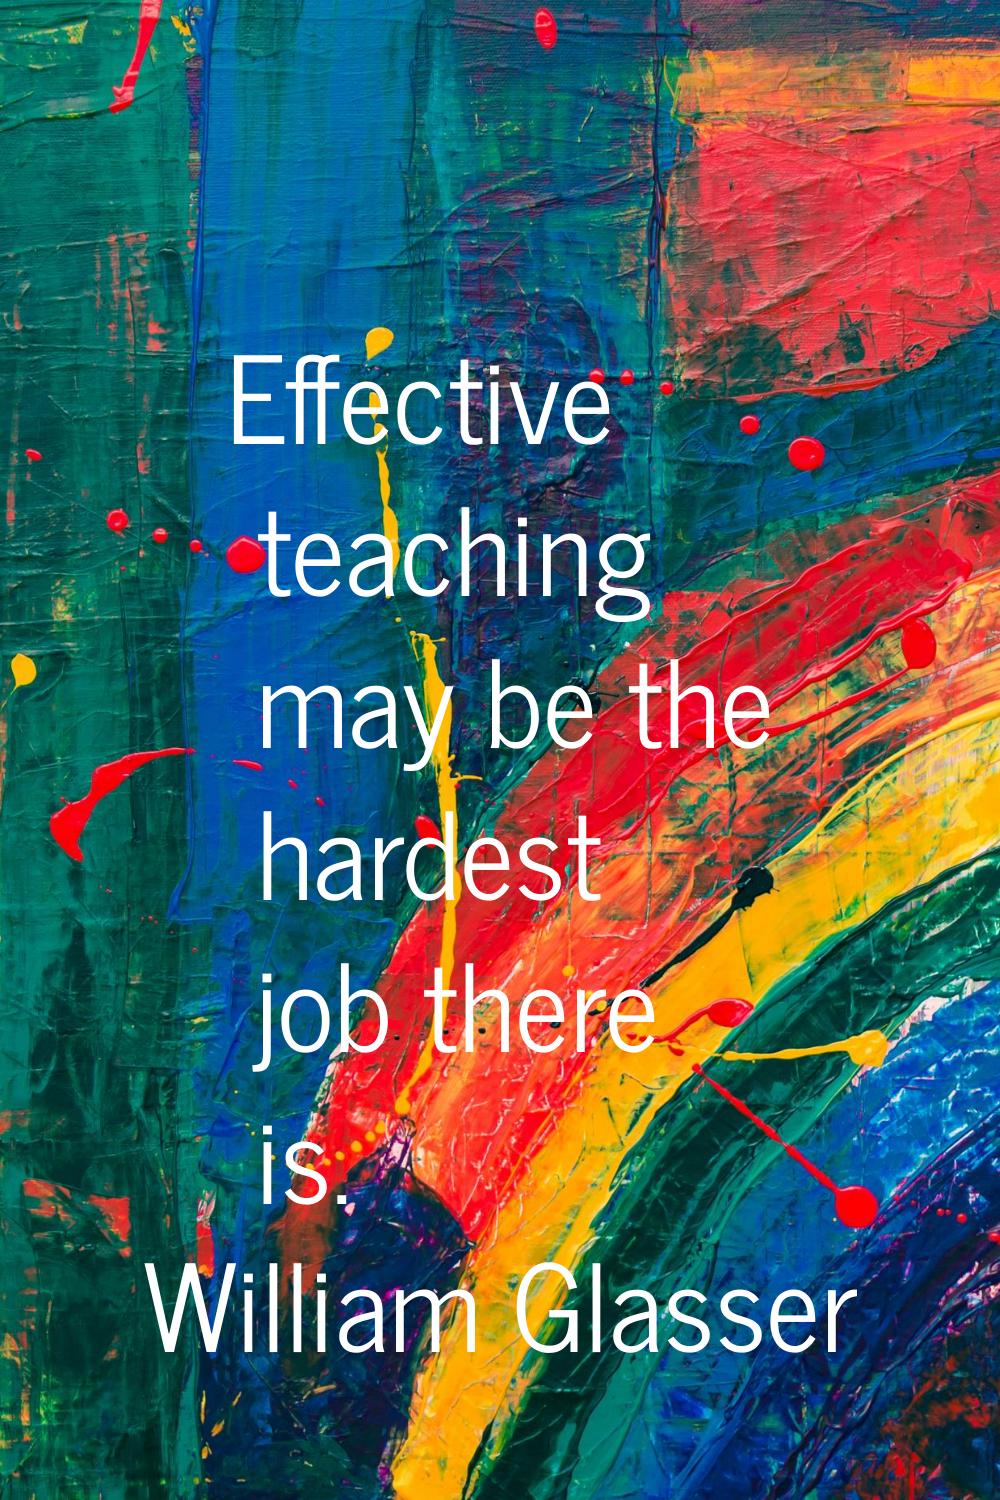 Effective teaching may be the hardest job there is.